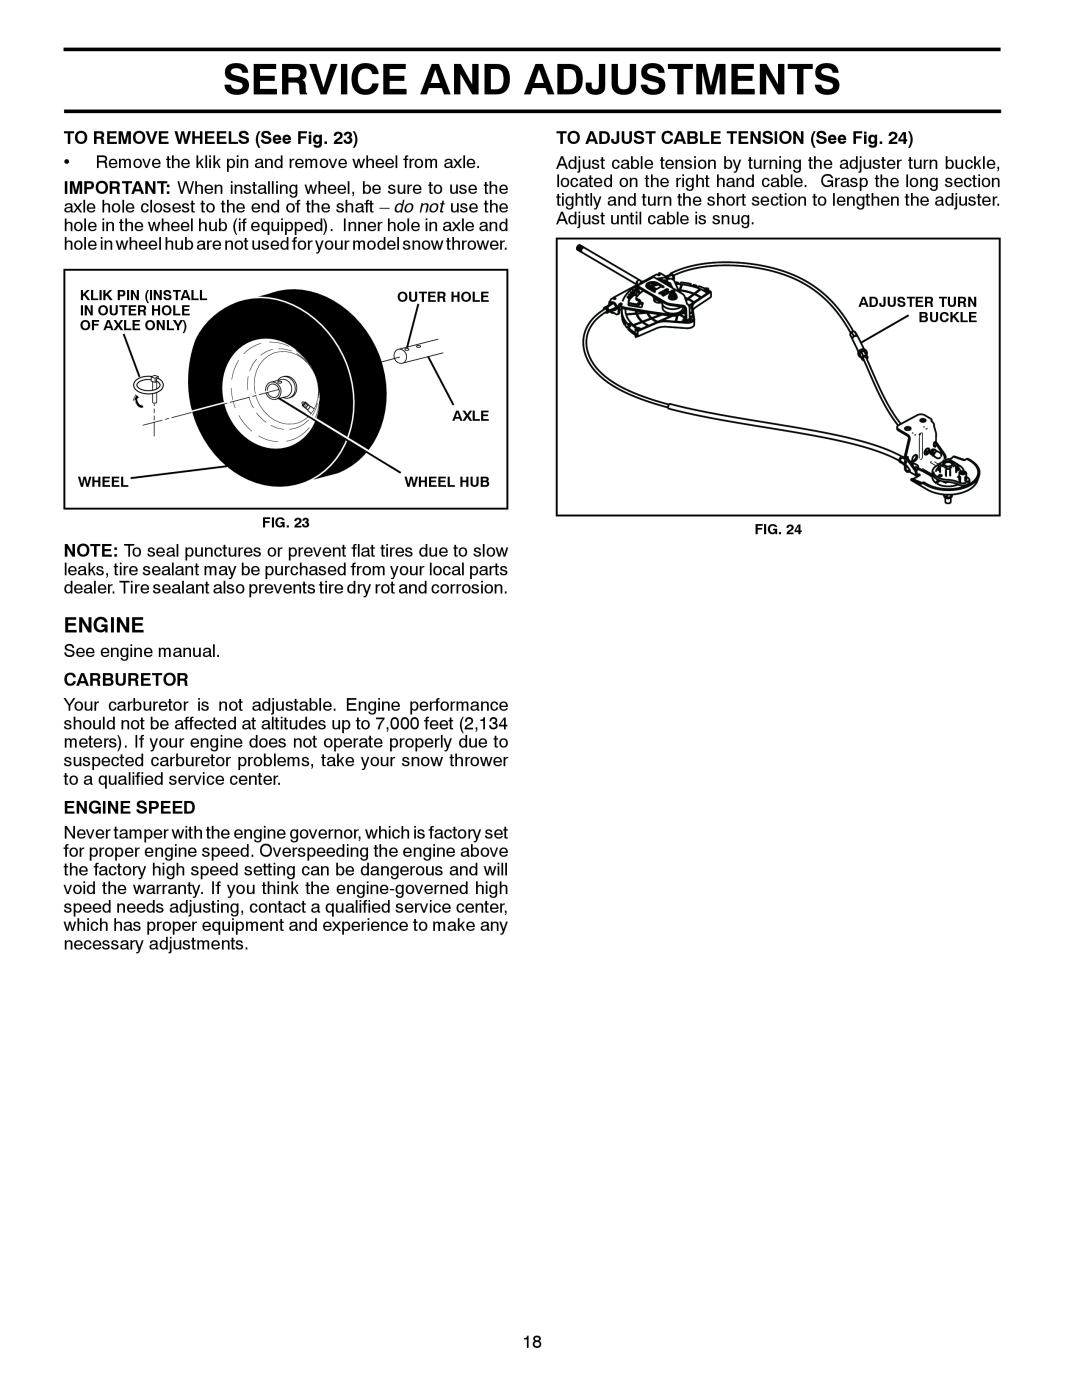 Poulan 435560, 96194000901 owner manual Service And Adjustments, TO REMOVE WHEELS See Fig, Carburetor, Engine Speed 